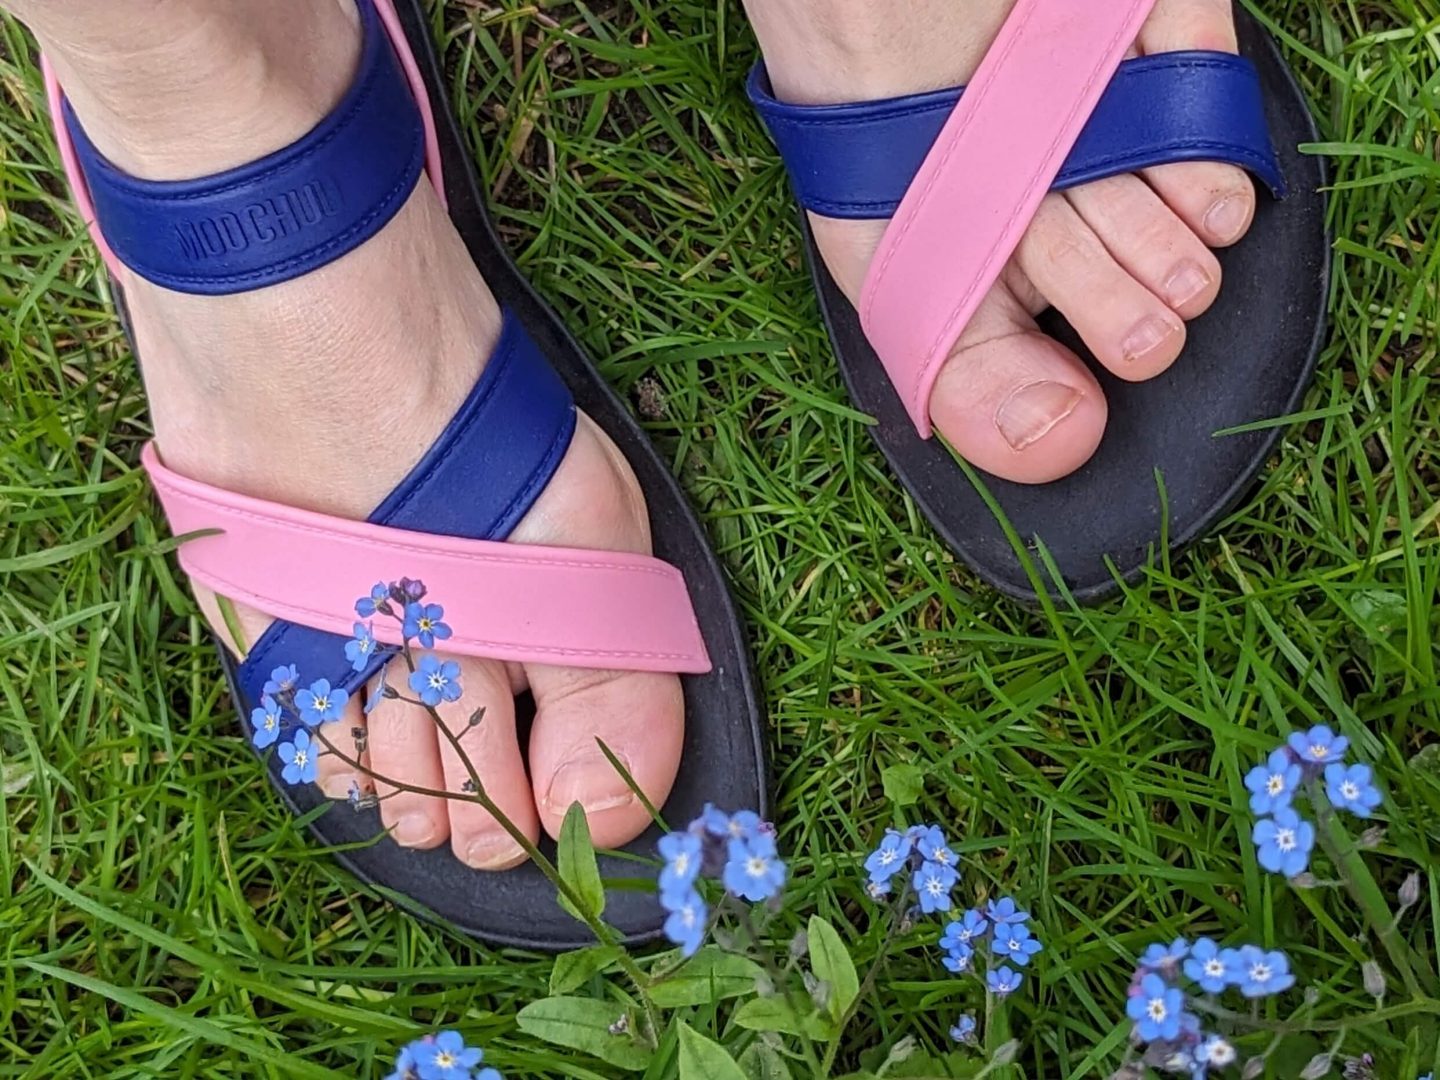 Female feet wearing pink and blue MOO CHUU sandals standing next to forget me not flowers on grass